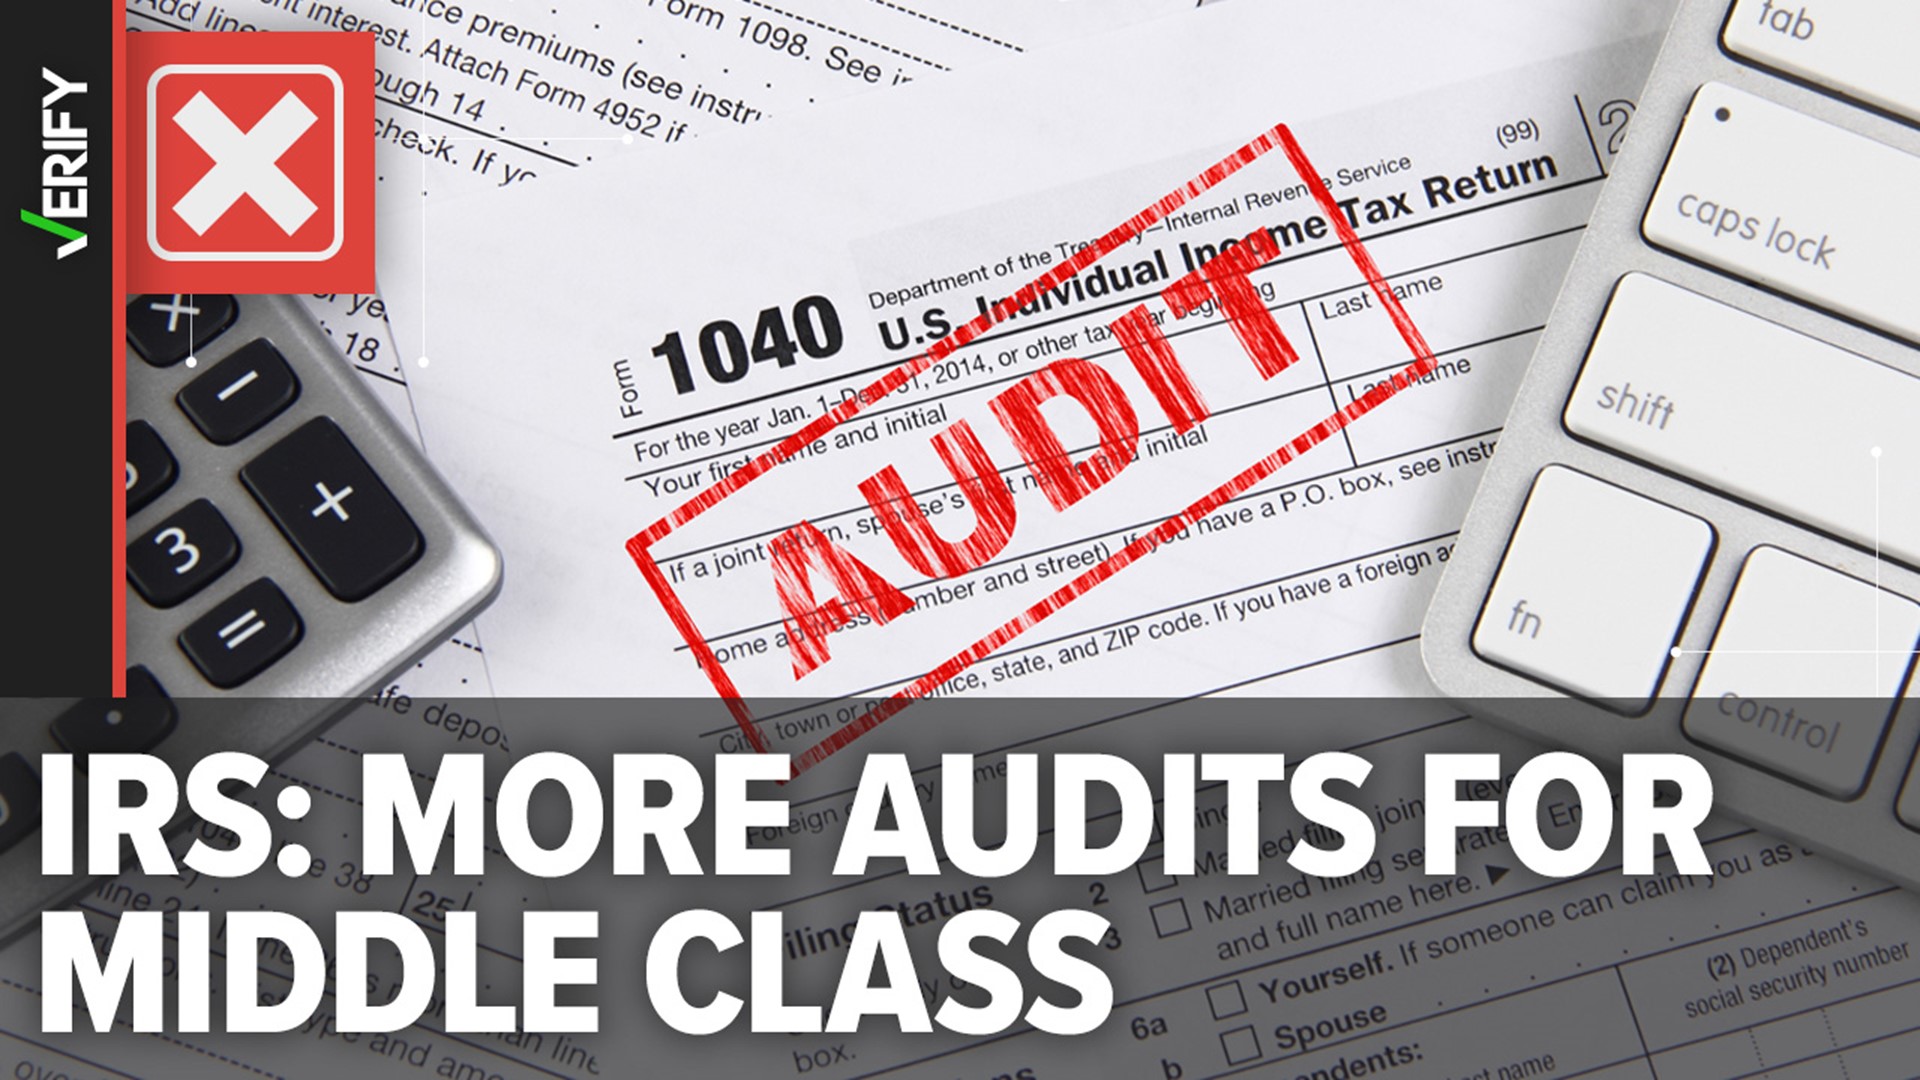 During a recent House hearing, IRS Commissioner Danny Werfel reaffirmed the agency’s commitment to not increasing audits for people making under $400,000 per year.